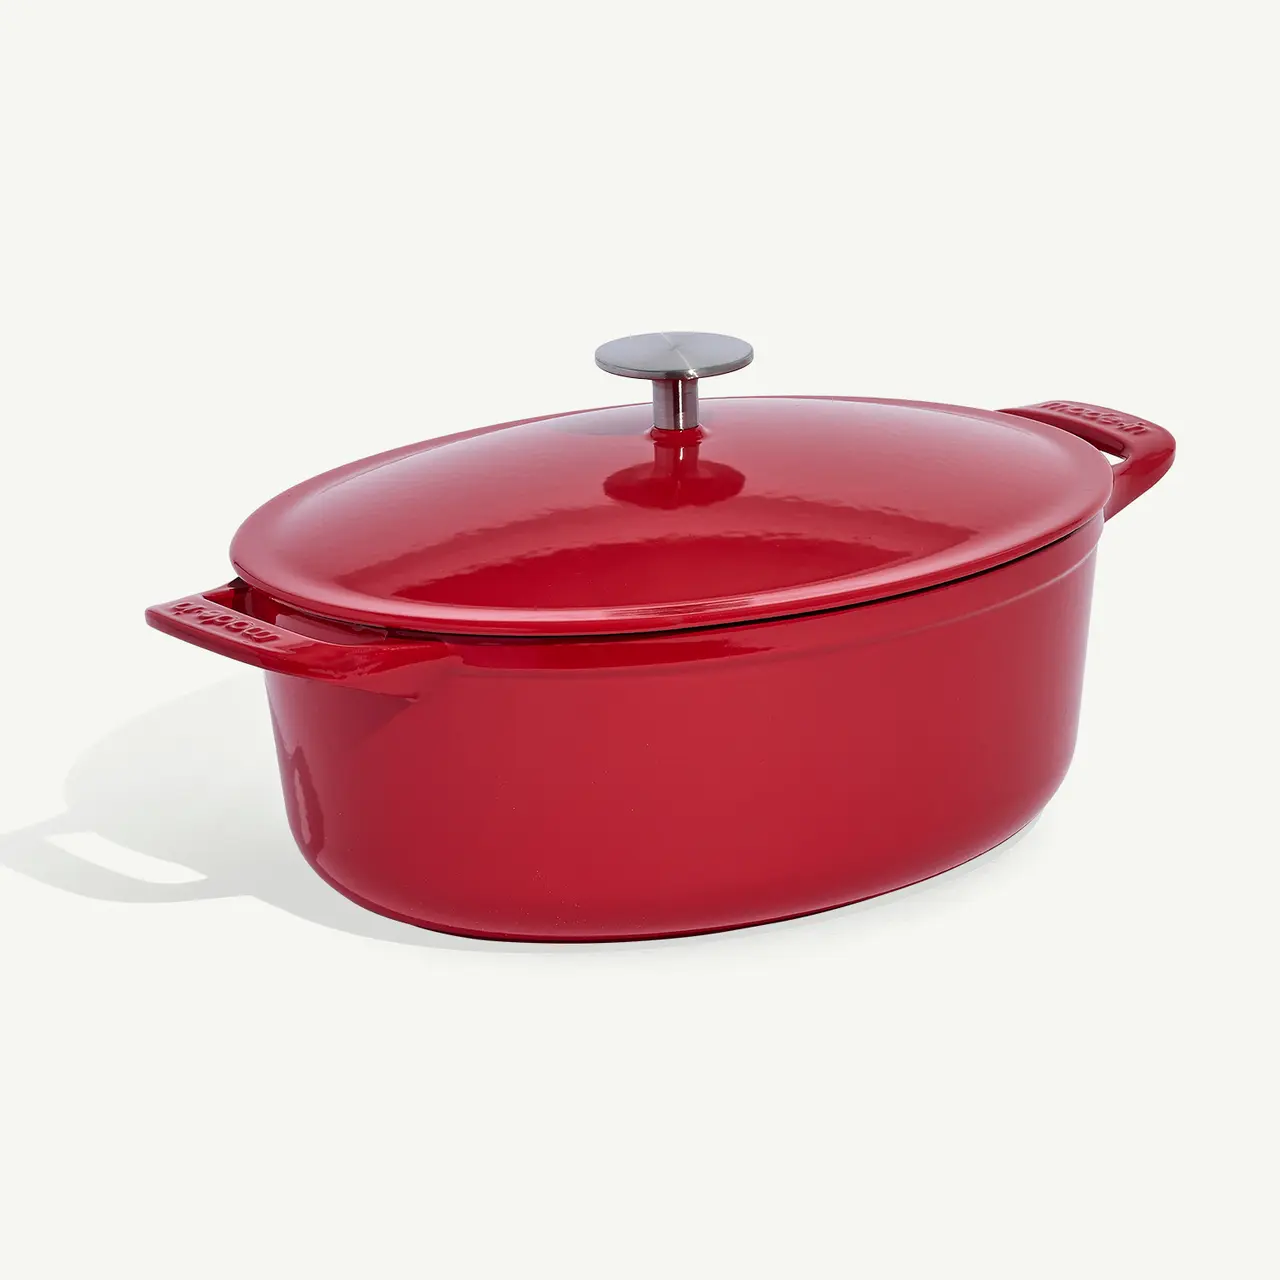 A red enameled cast iron dutch oven with a lid on a white background.